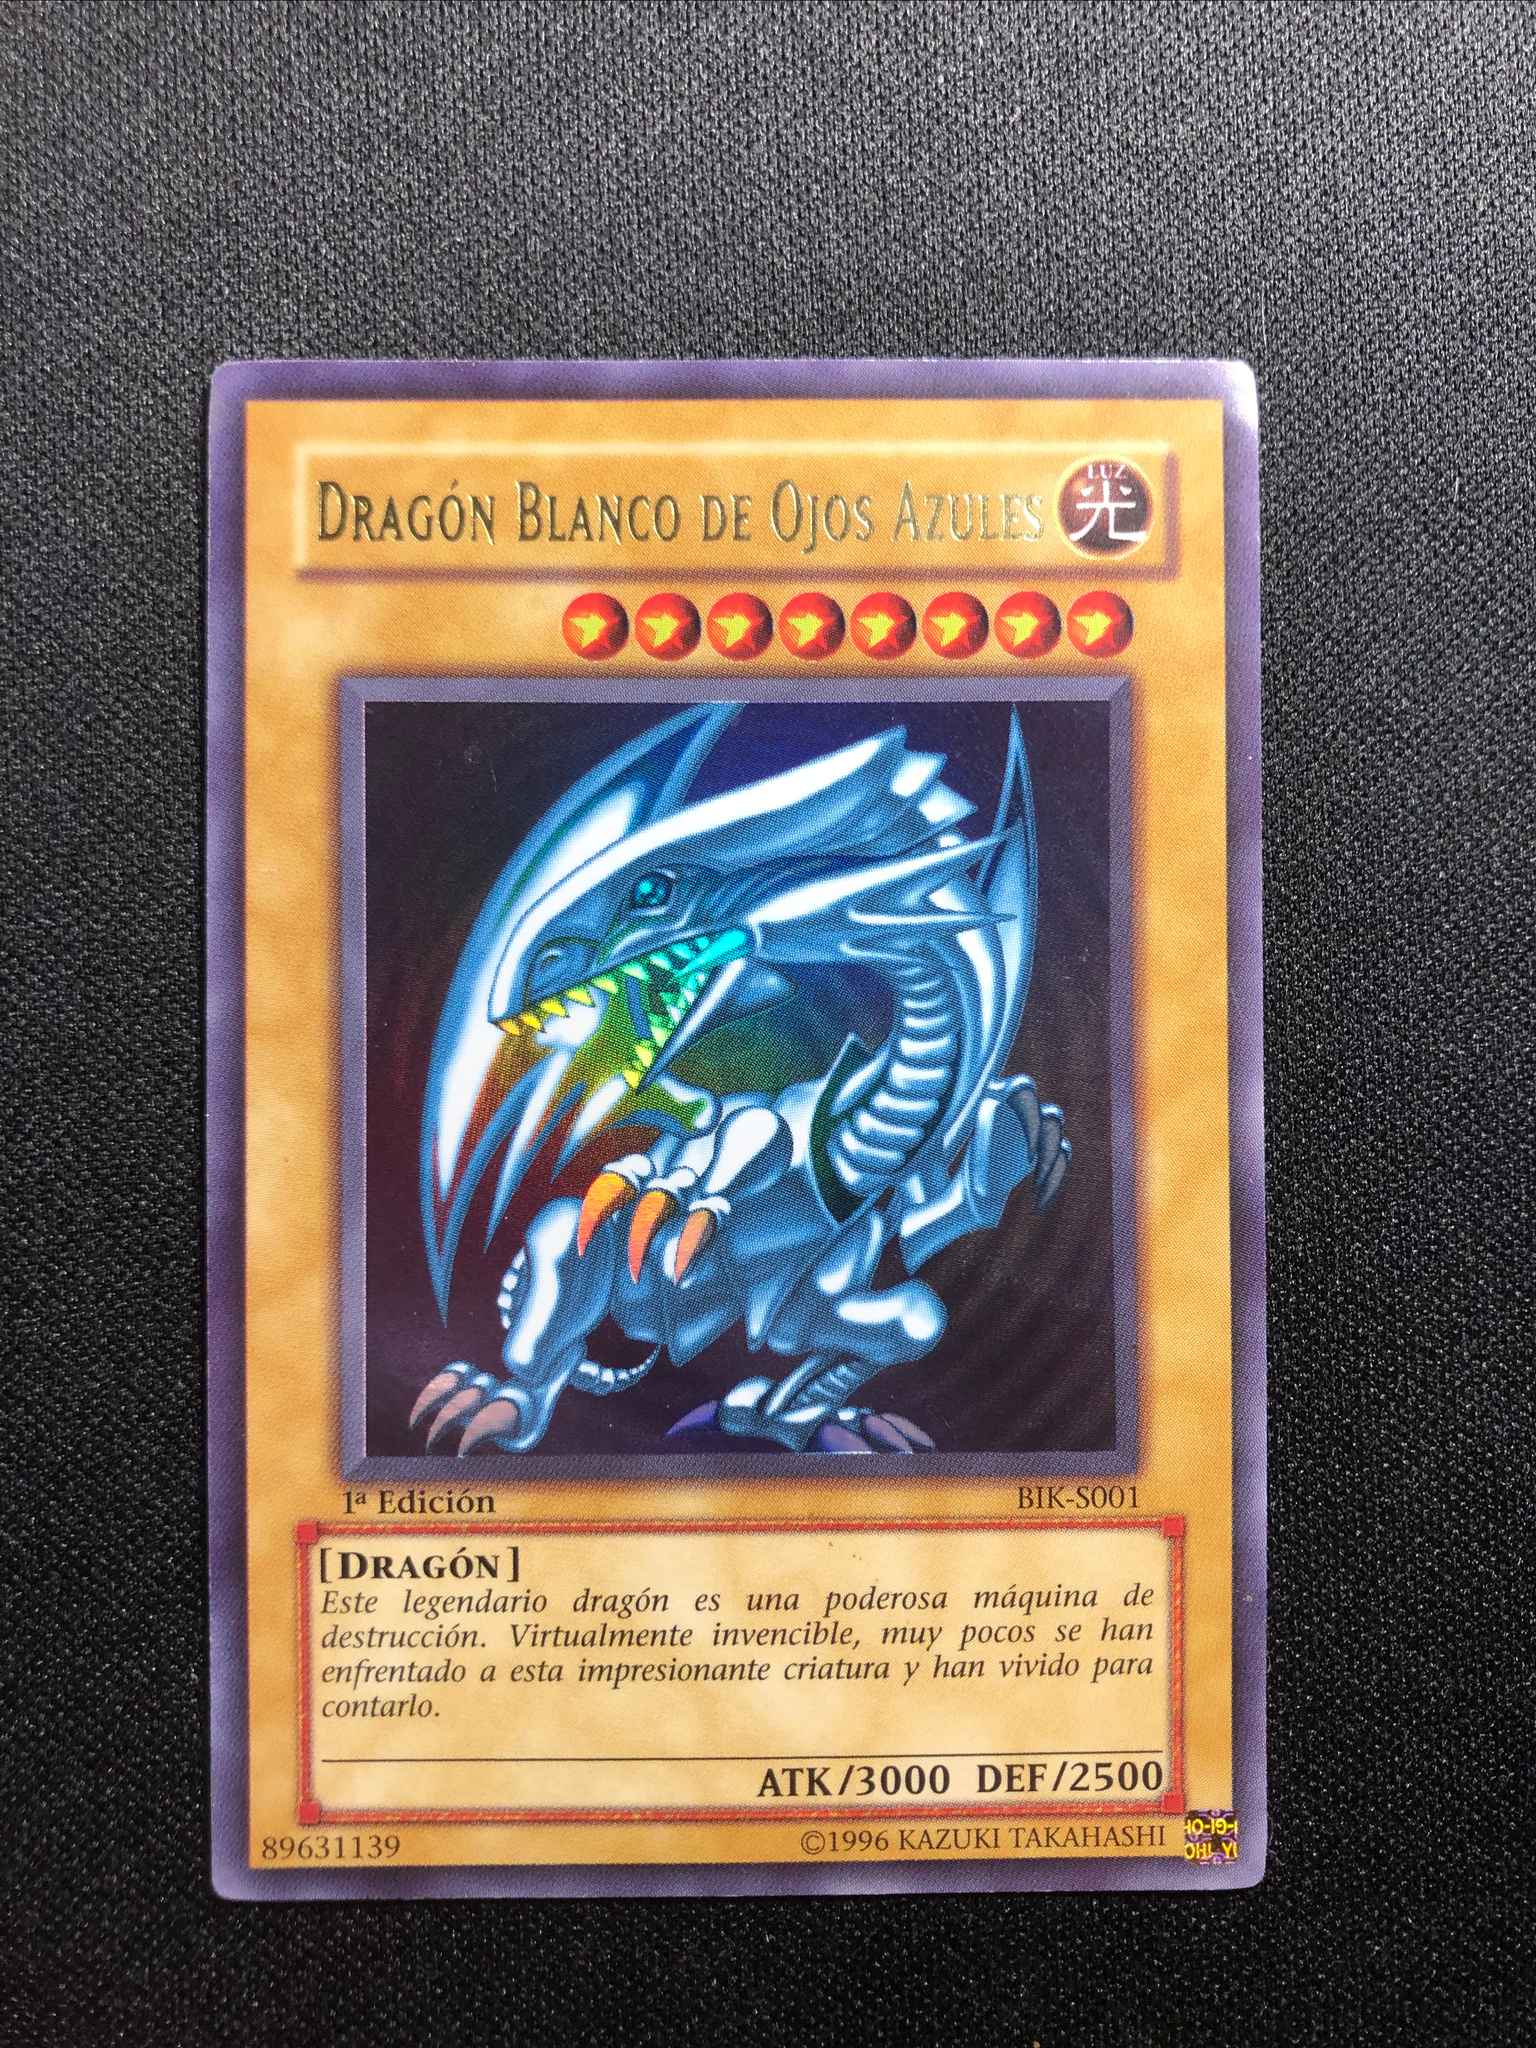 Spanish Blue Eyes White Dragon Bik S001 1st Edition Blue Eyes White Dragon Starter Deck Kaiba Yugioh Online Gaming Store For Cards Miniatures Singles Packs Booster Boxes